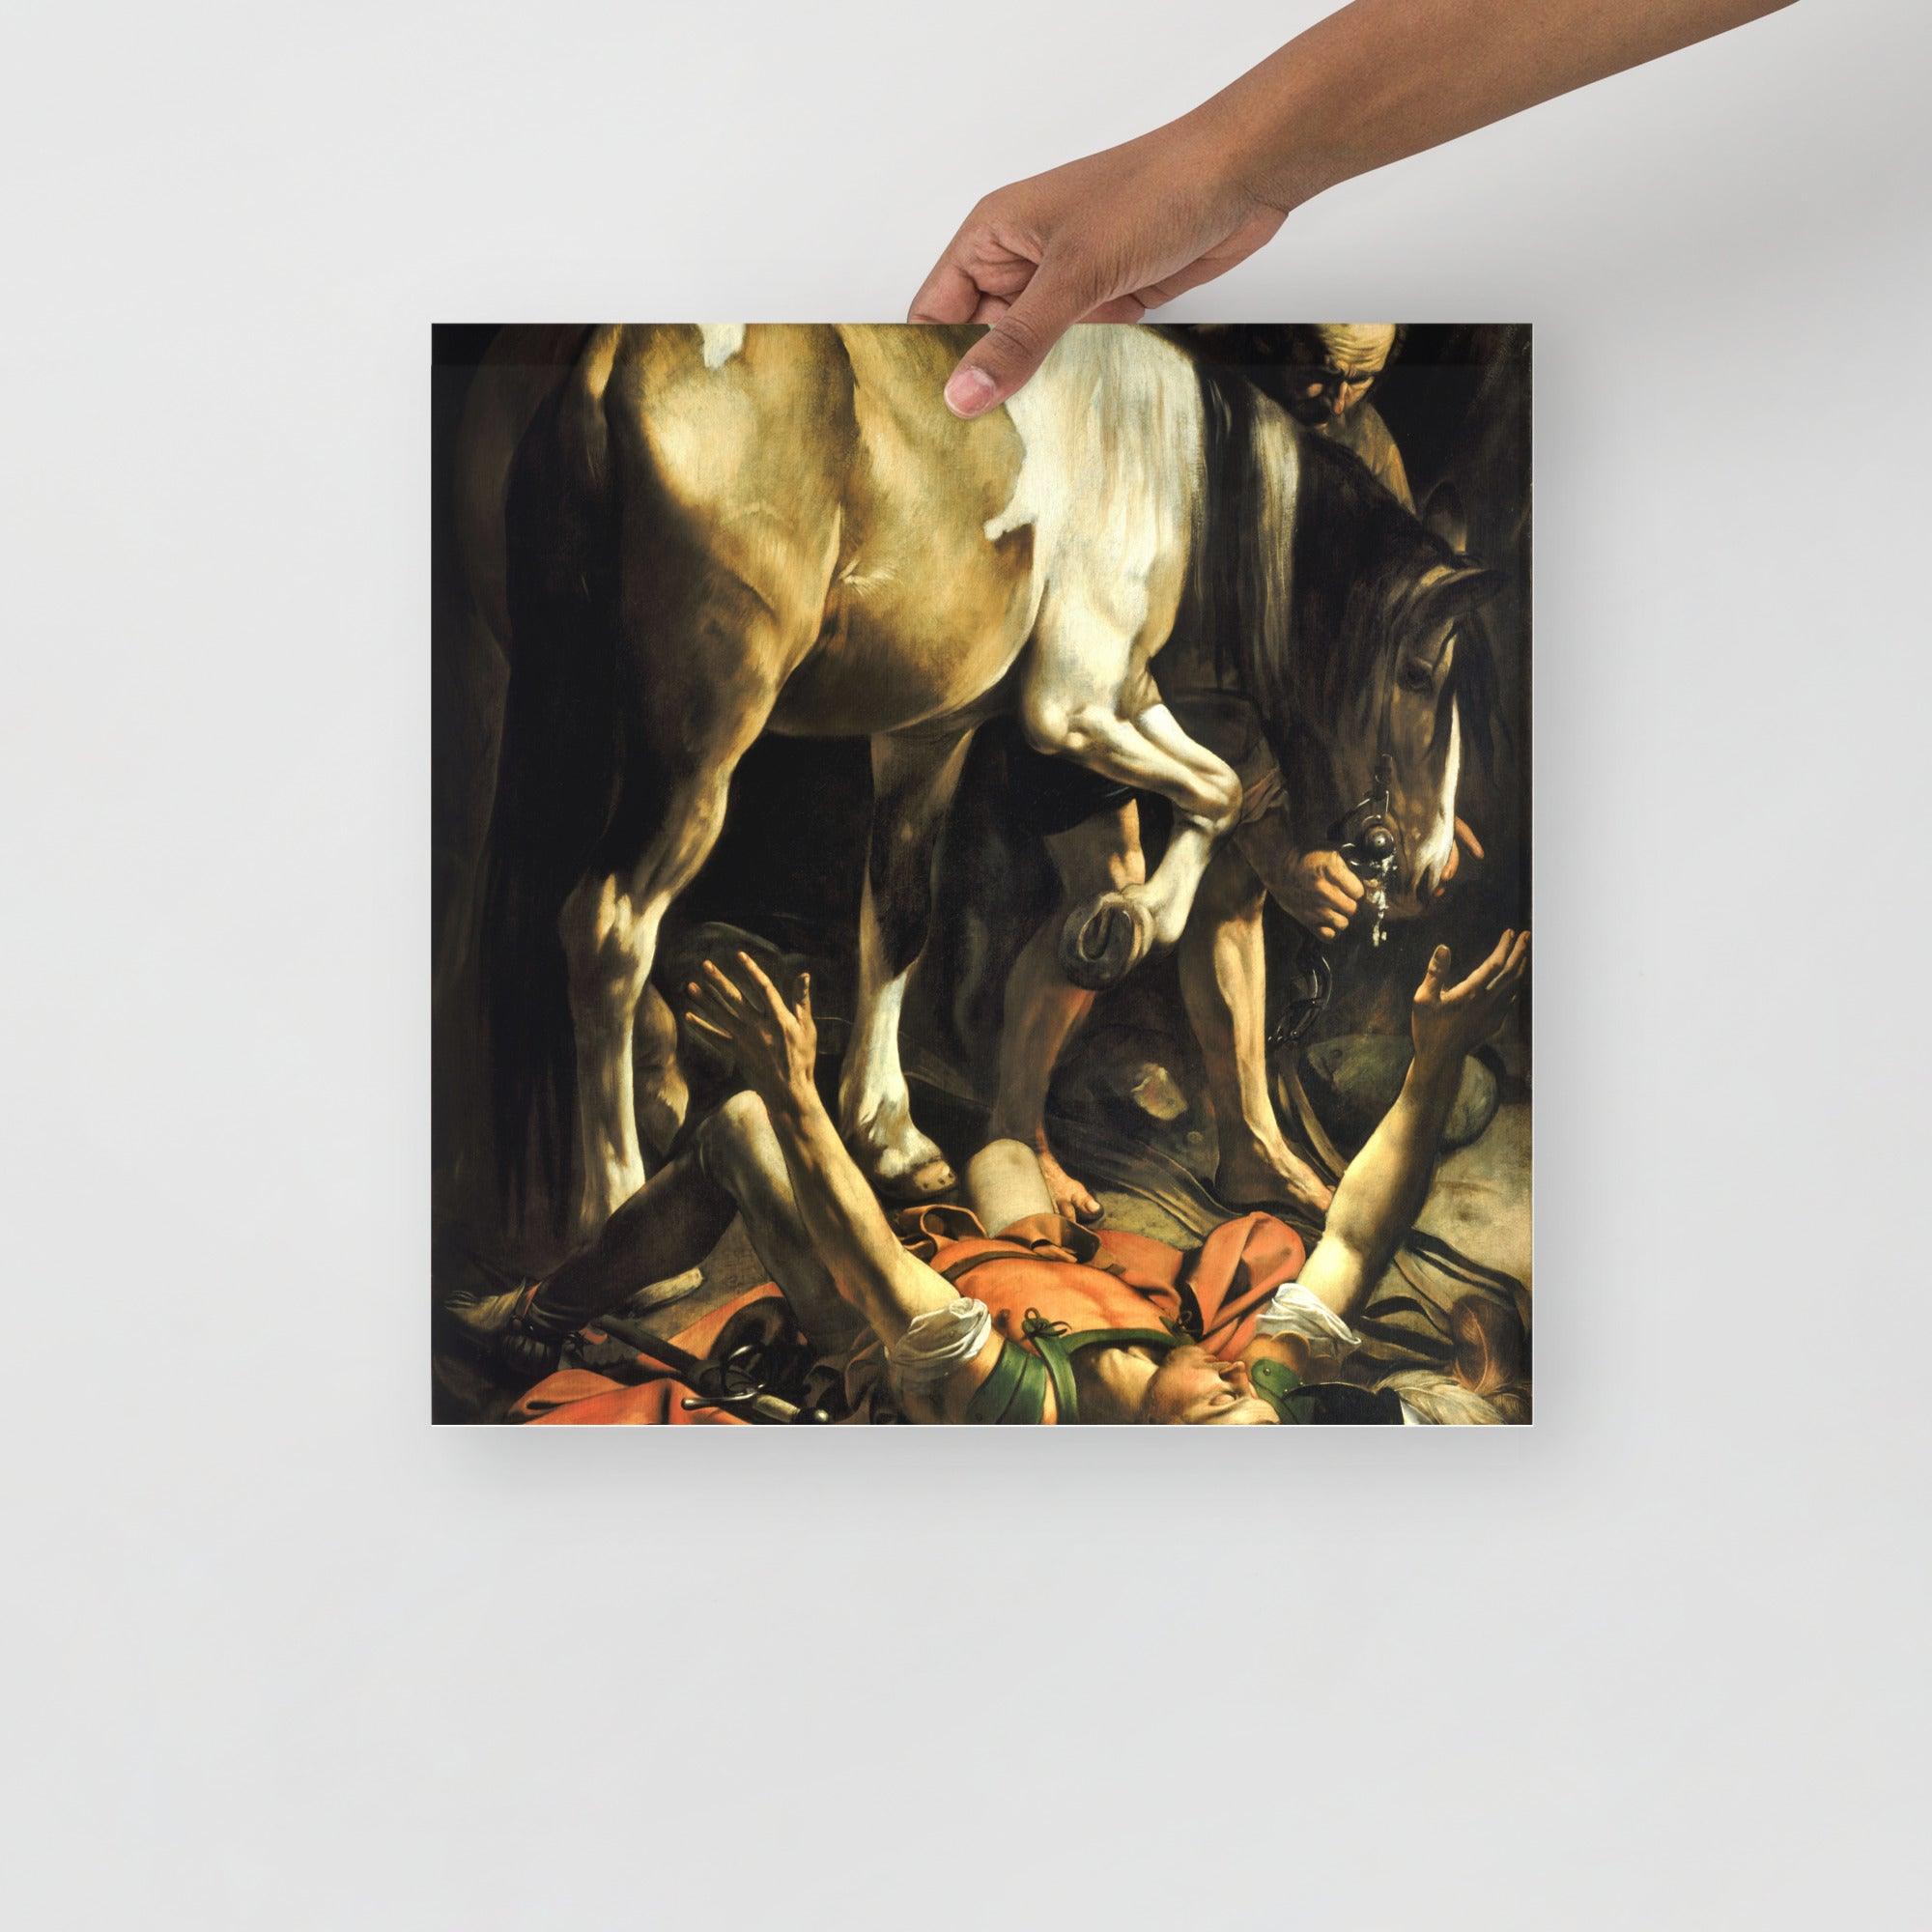 A Conversion on the Way to Damascus by Caravaggio poster on a plain backdrop in size 16x16”.